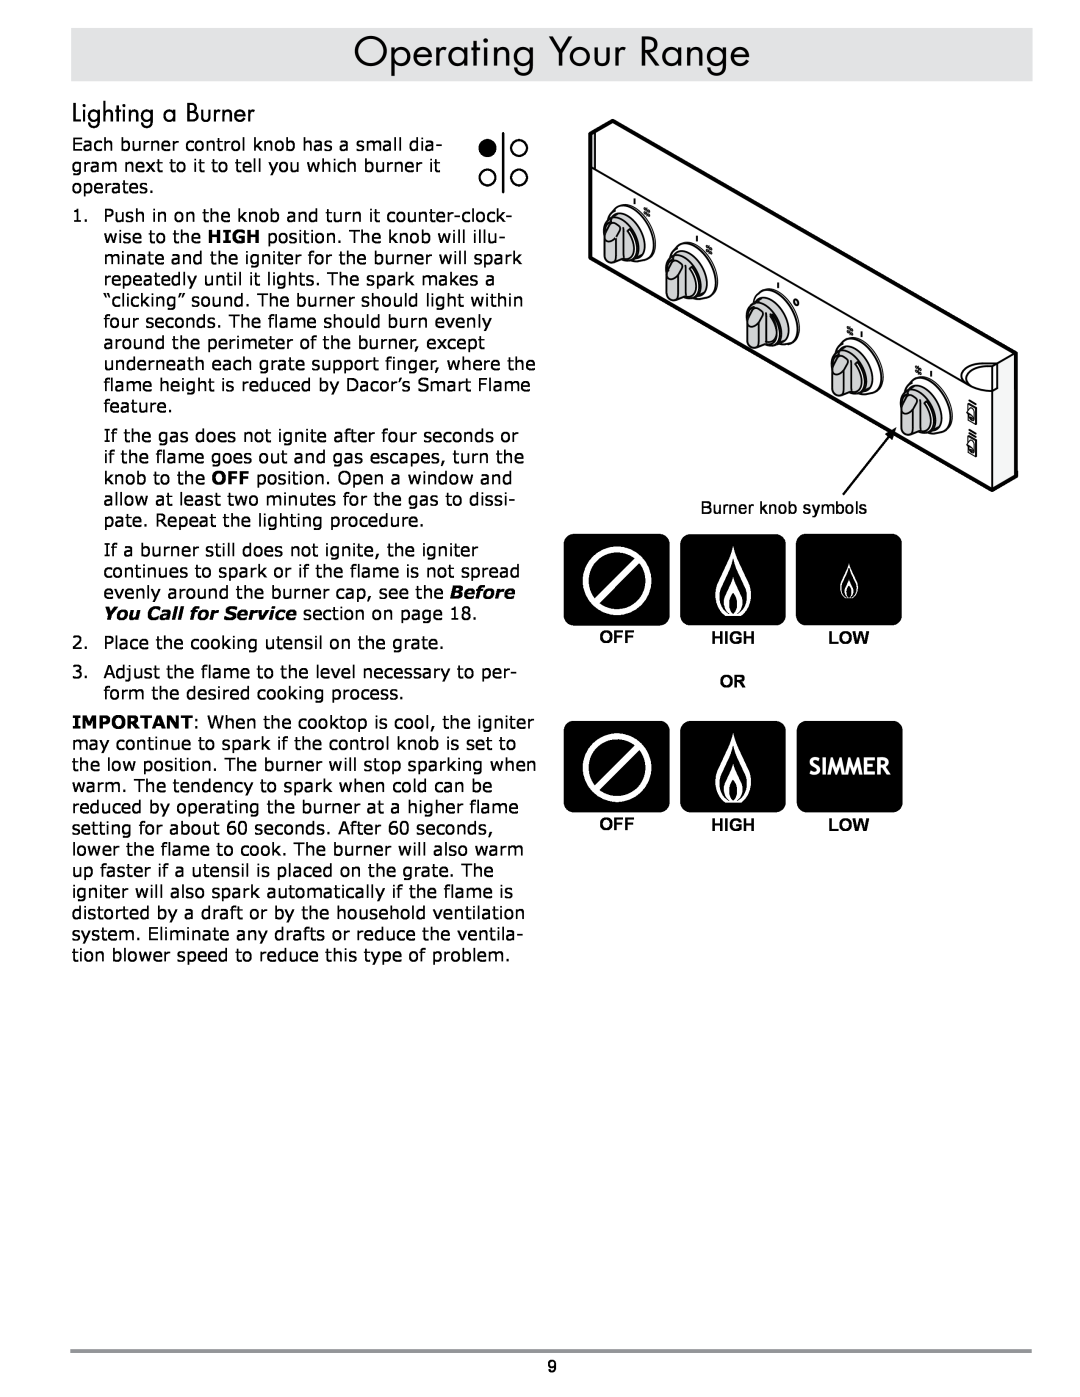 Sears ER30GI manual Lighting a Burner, Off High Low Or Off High Low, Operating Your Range 